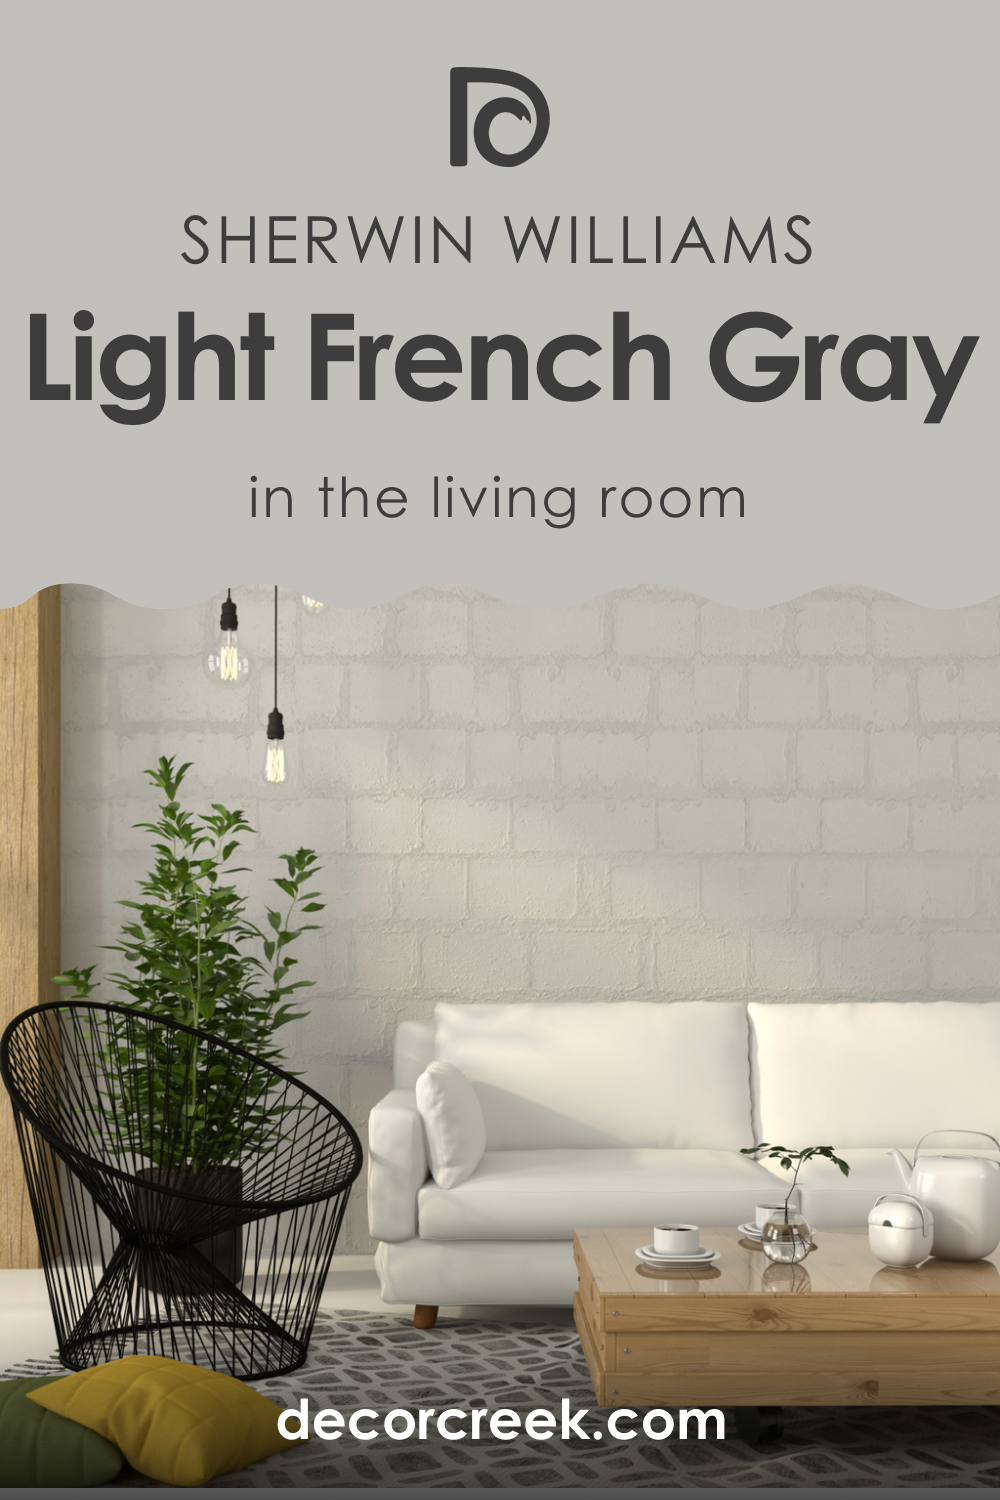 How to Use SW 0055 Light French Gray in the Living Room?